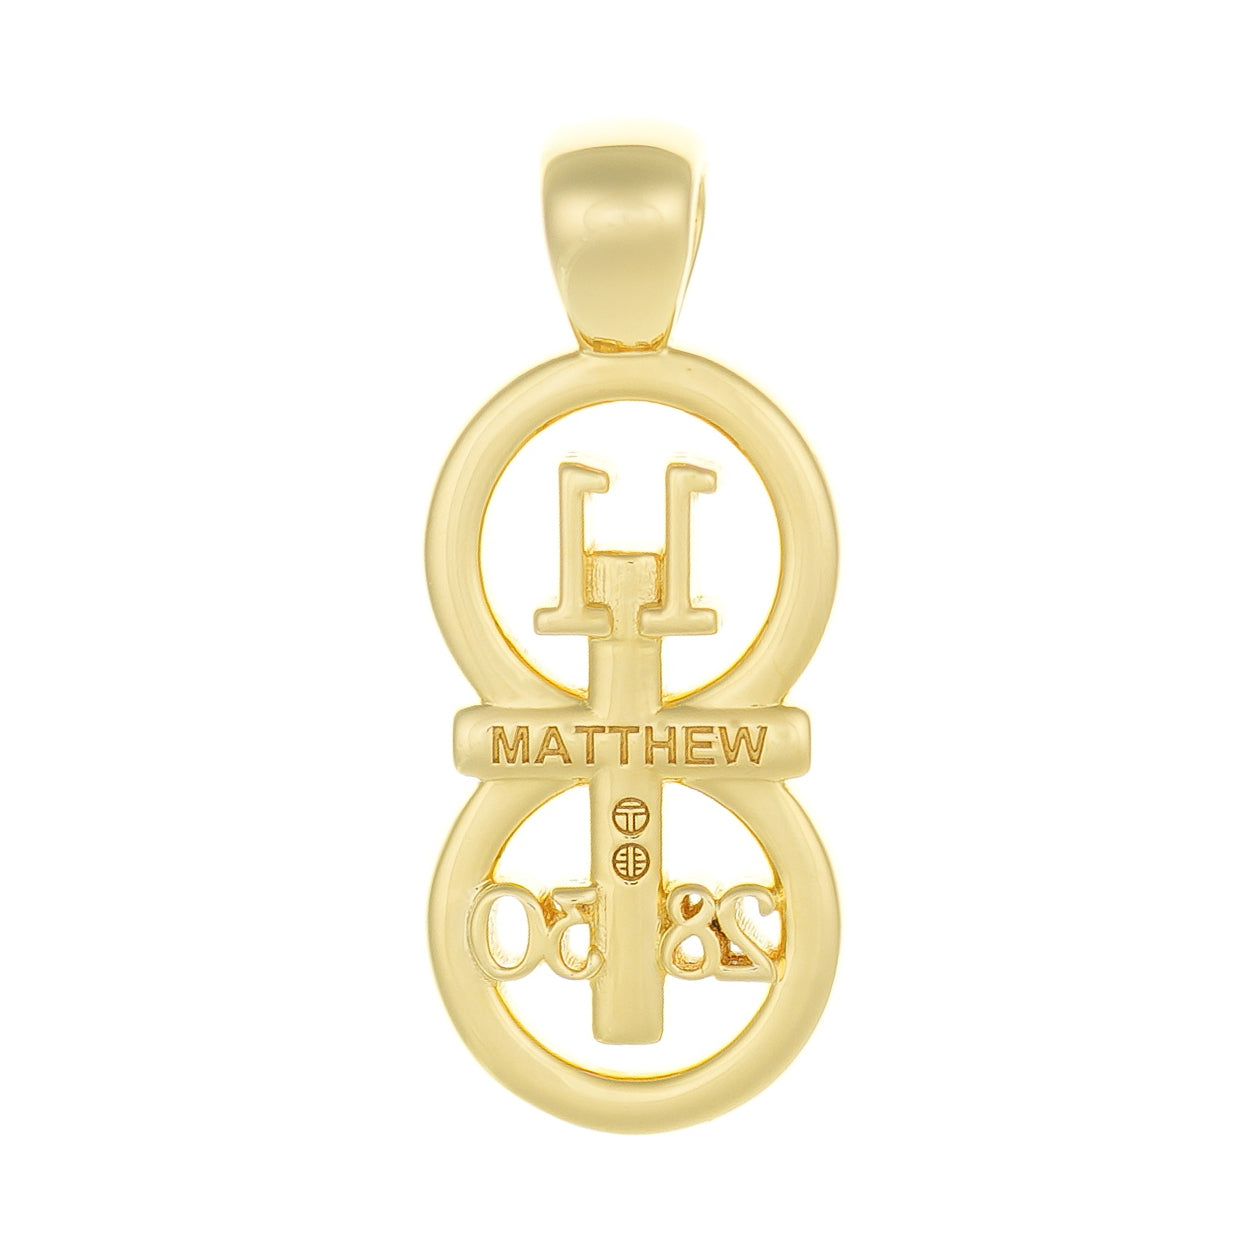 Back of the pendant shows the detail of the chapter name inscribed on the pendant and also the inscription of our logo tag so you know it is authentic. The RIYAN 29 and 11® pendant has the numbers 11, 28, and 30 intertwined with the cross to represent Matthew 11:28-30 with the chapter word "Matthew" inscribed on the back.